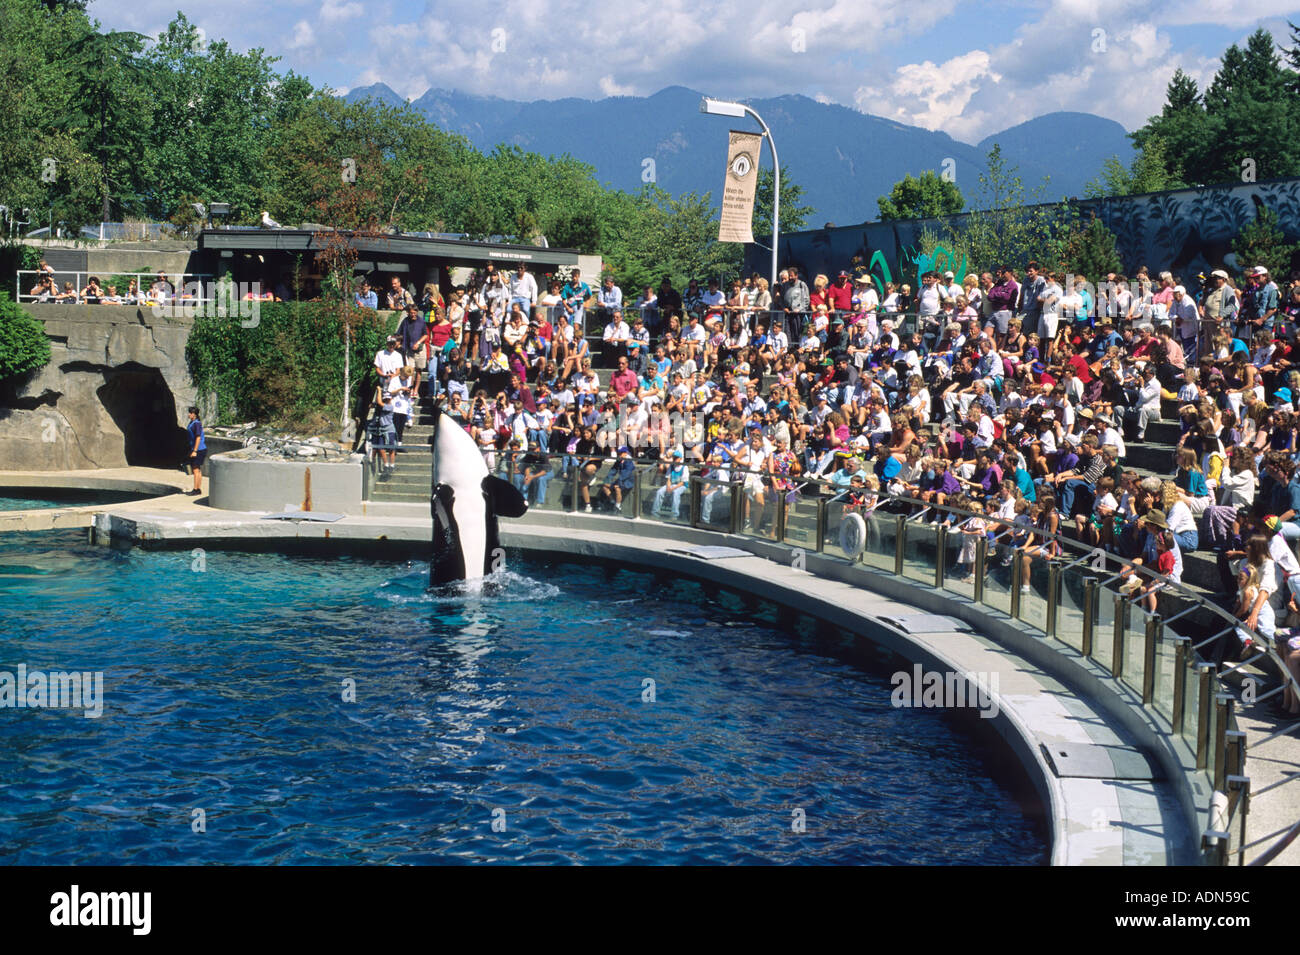 A killer whale performing before a crowd at the aquarium in Vancouver Canada  Stock Photo